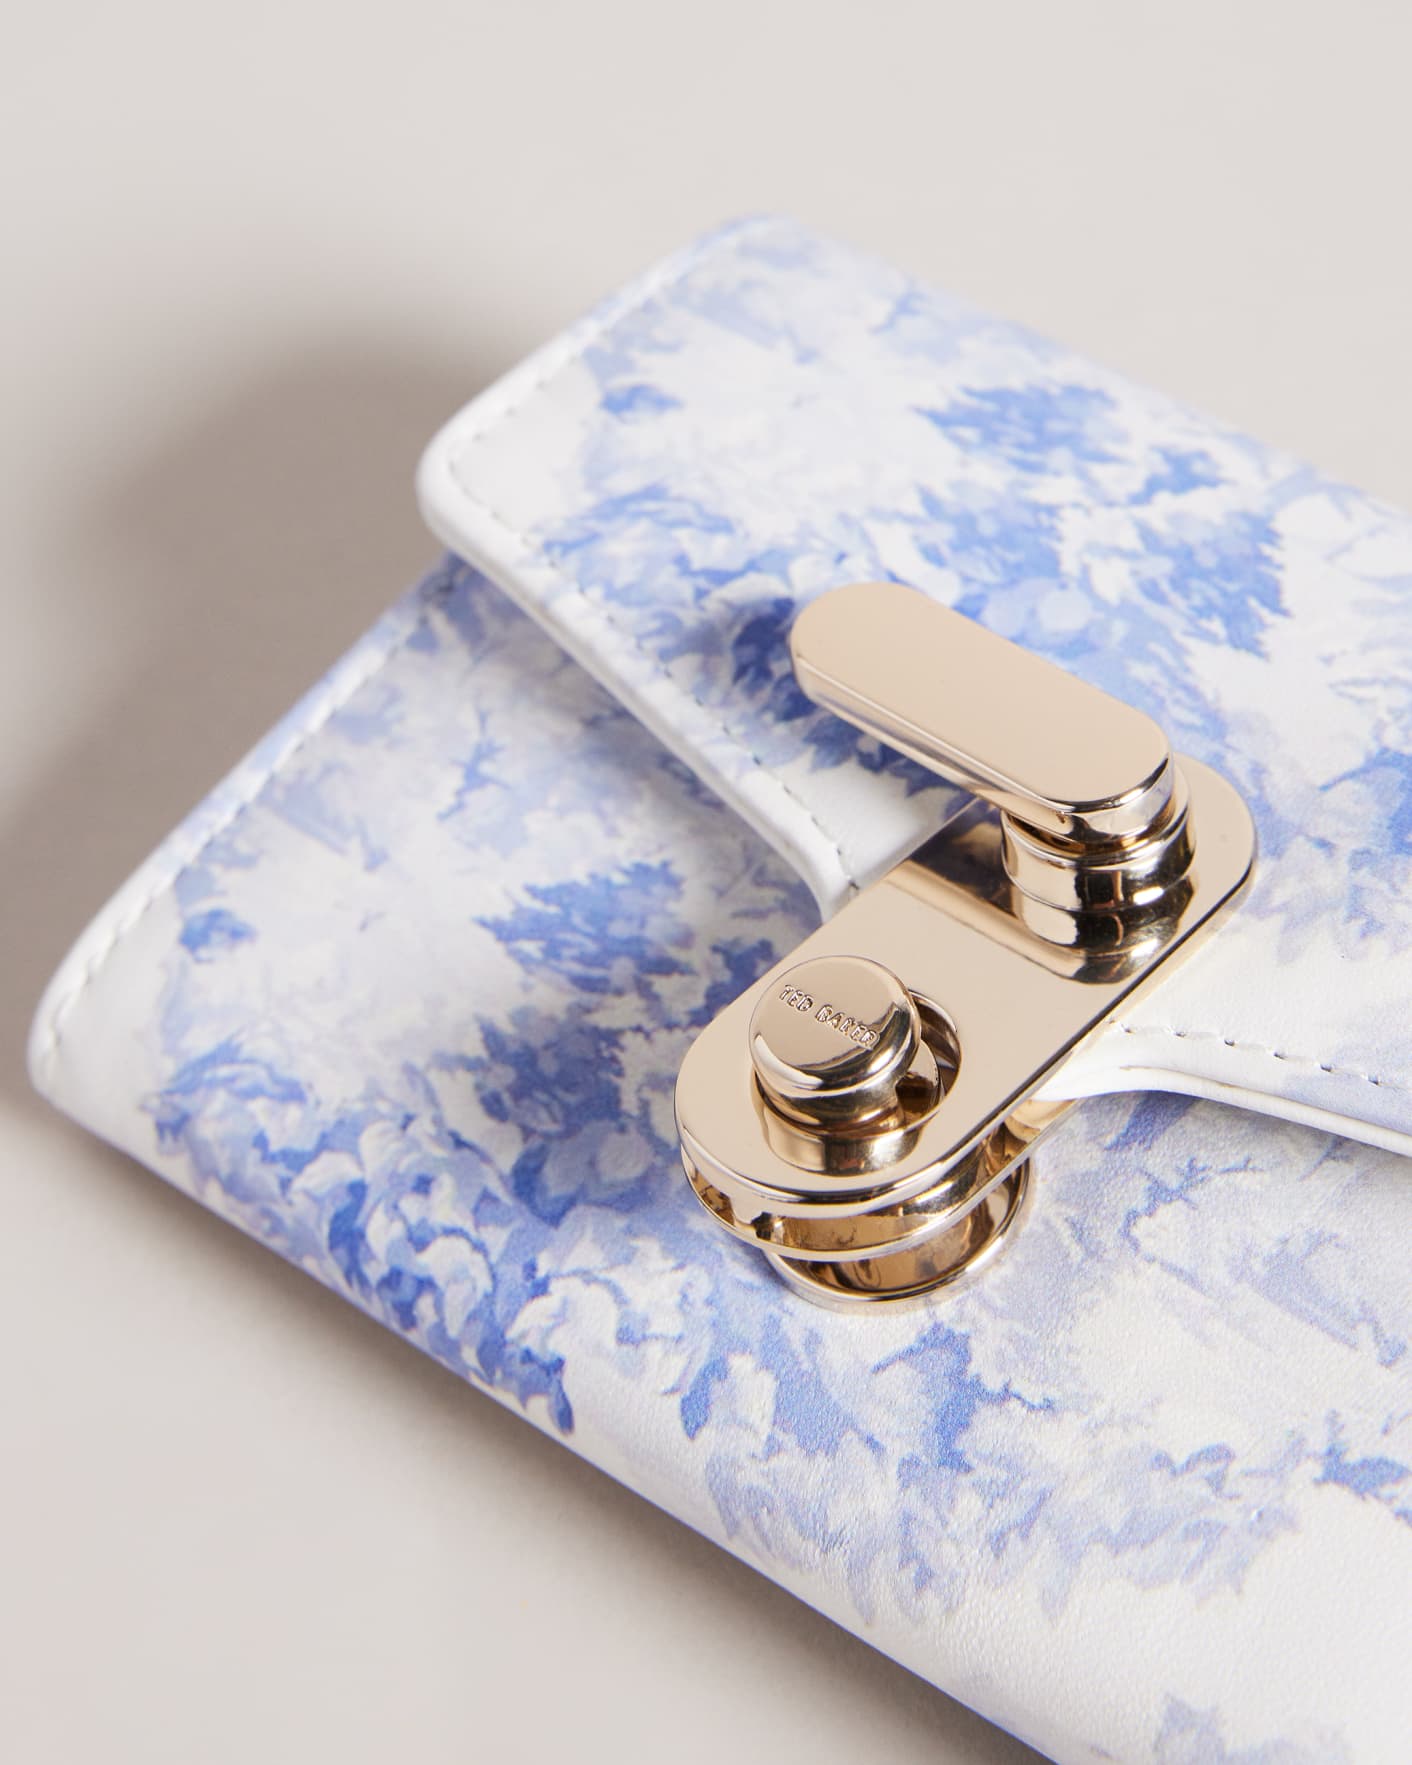 White New Romantic Landscape Small Purse Ted Baker